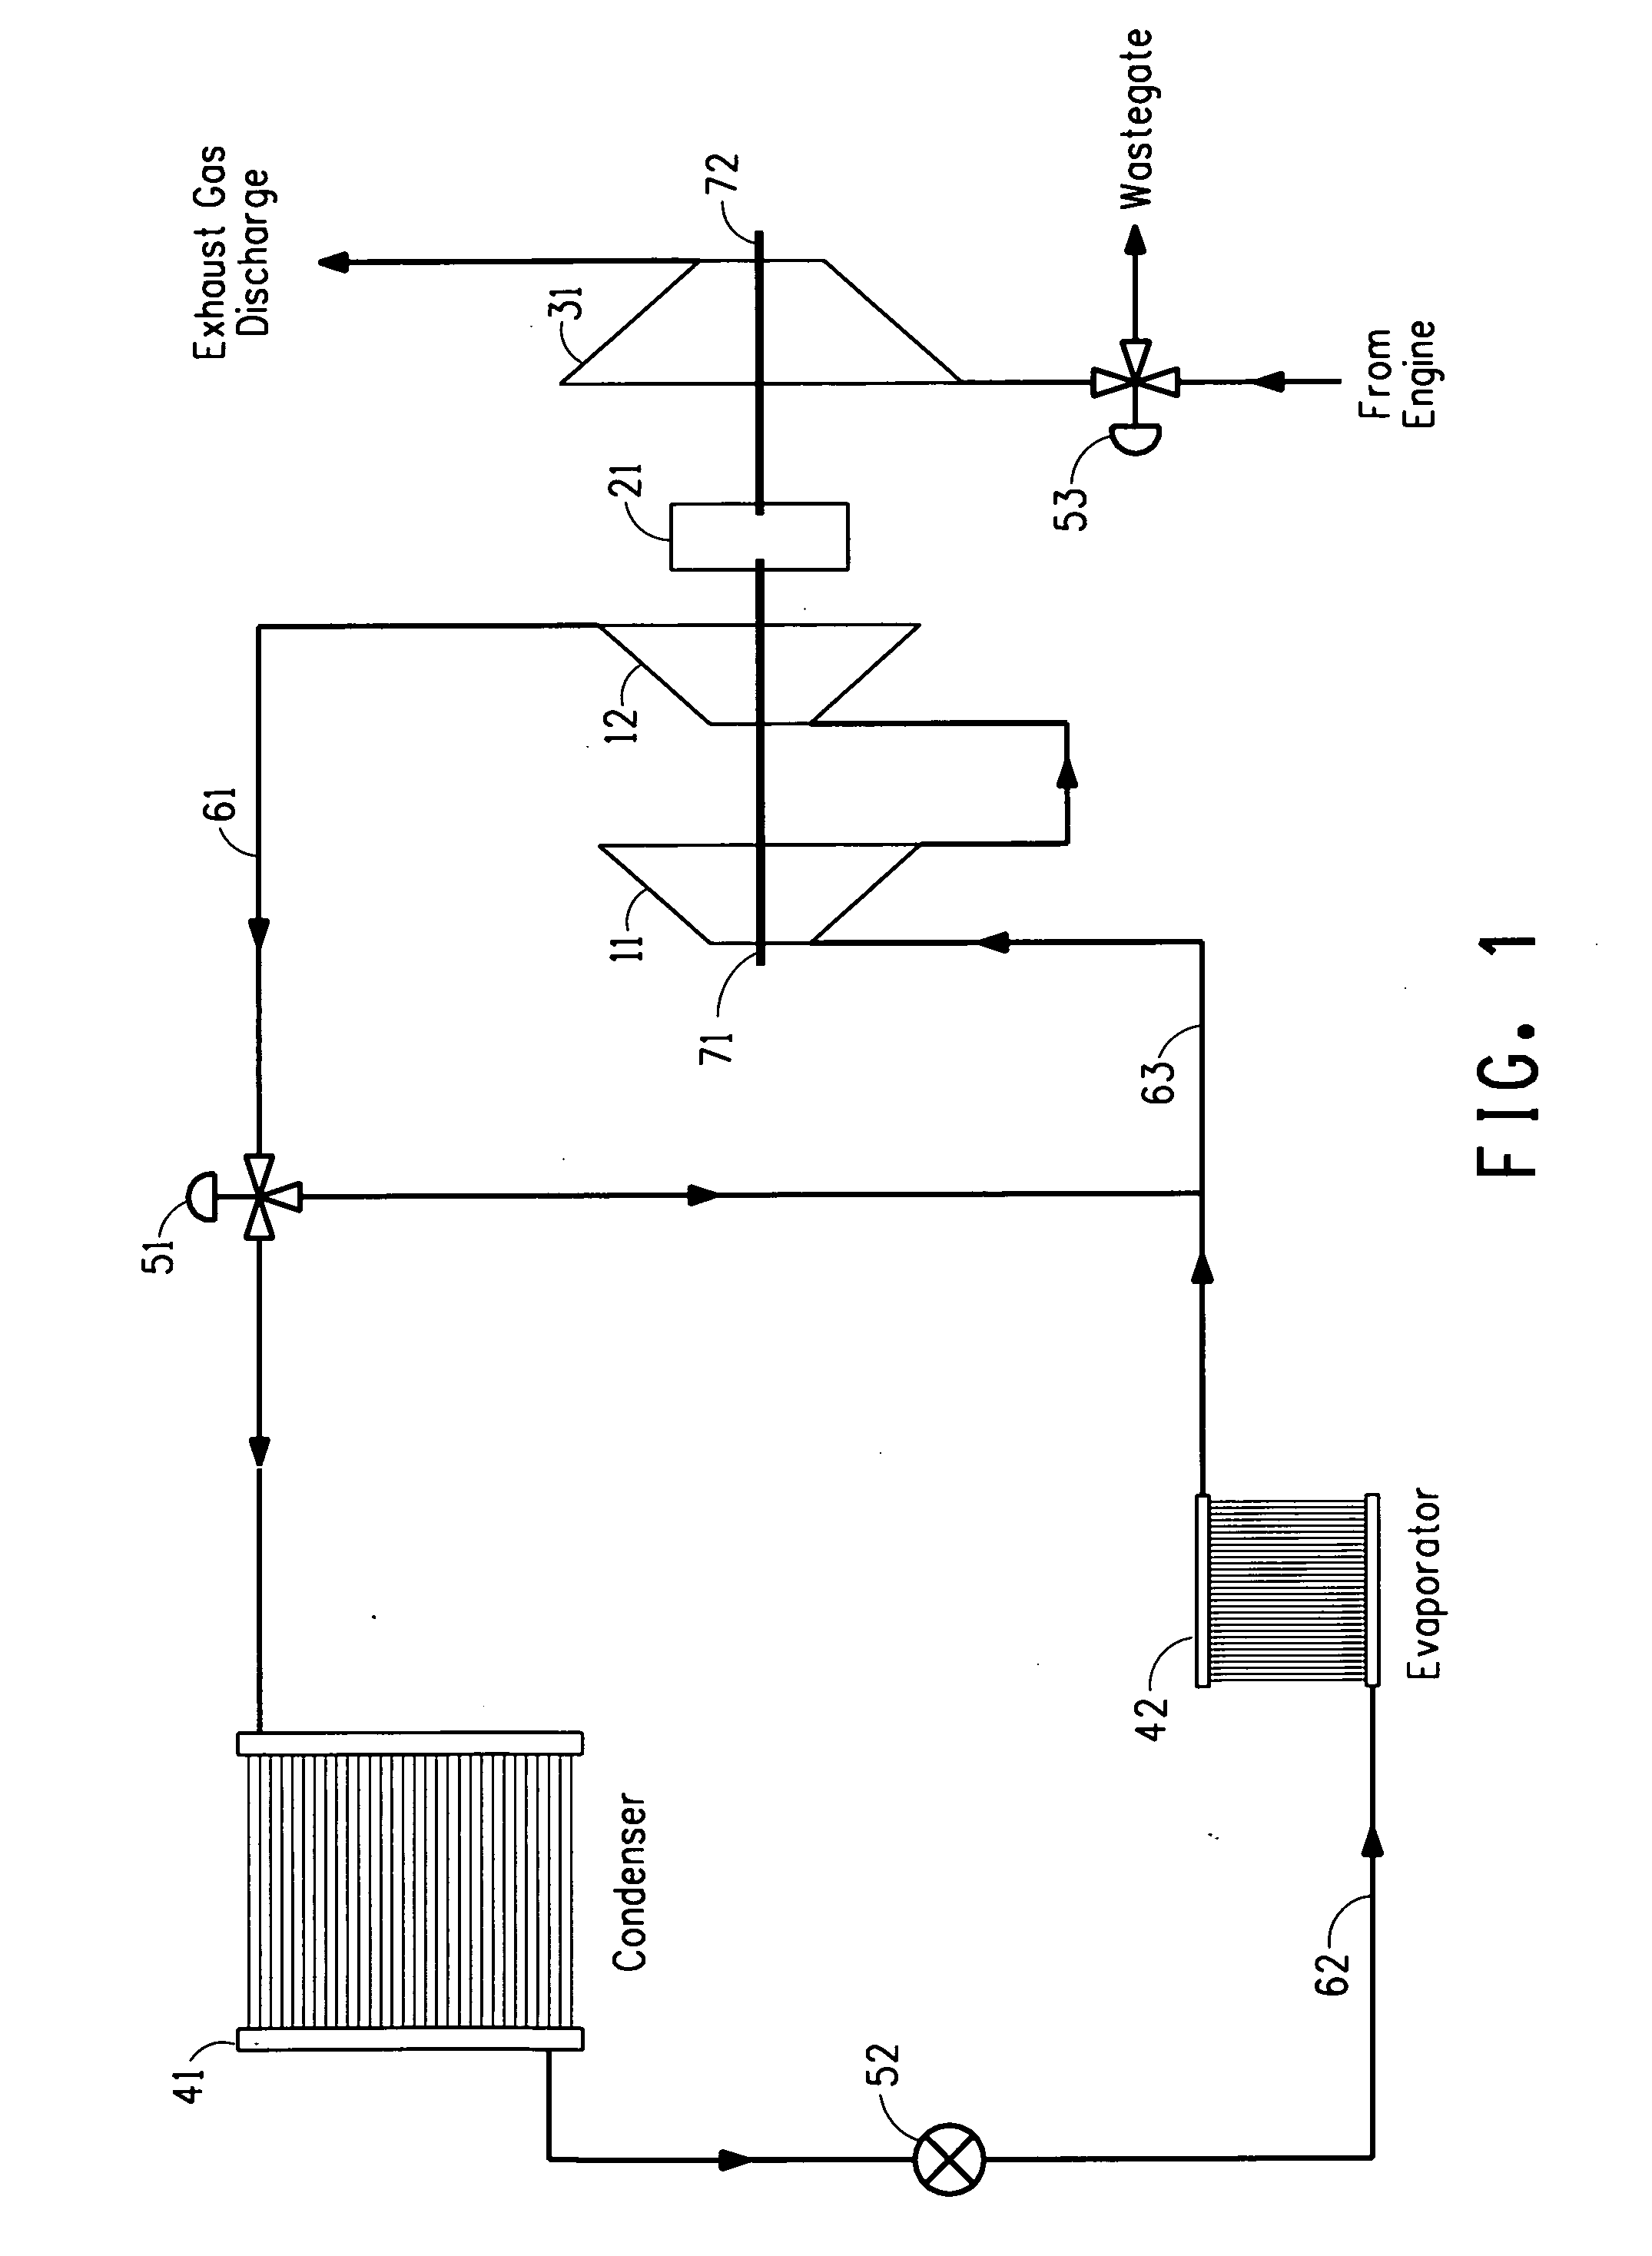 Refrigeration/air-conditioning apparatus powered by an engine exhaust gas driven turbine